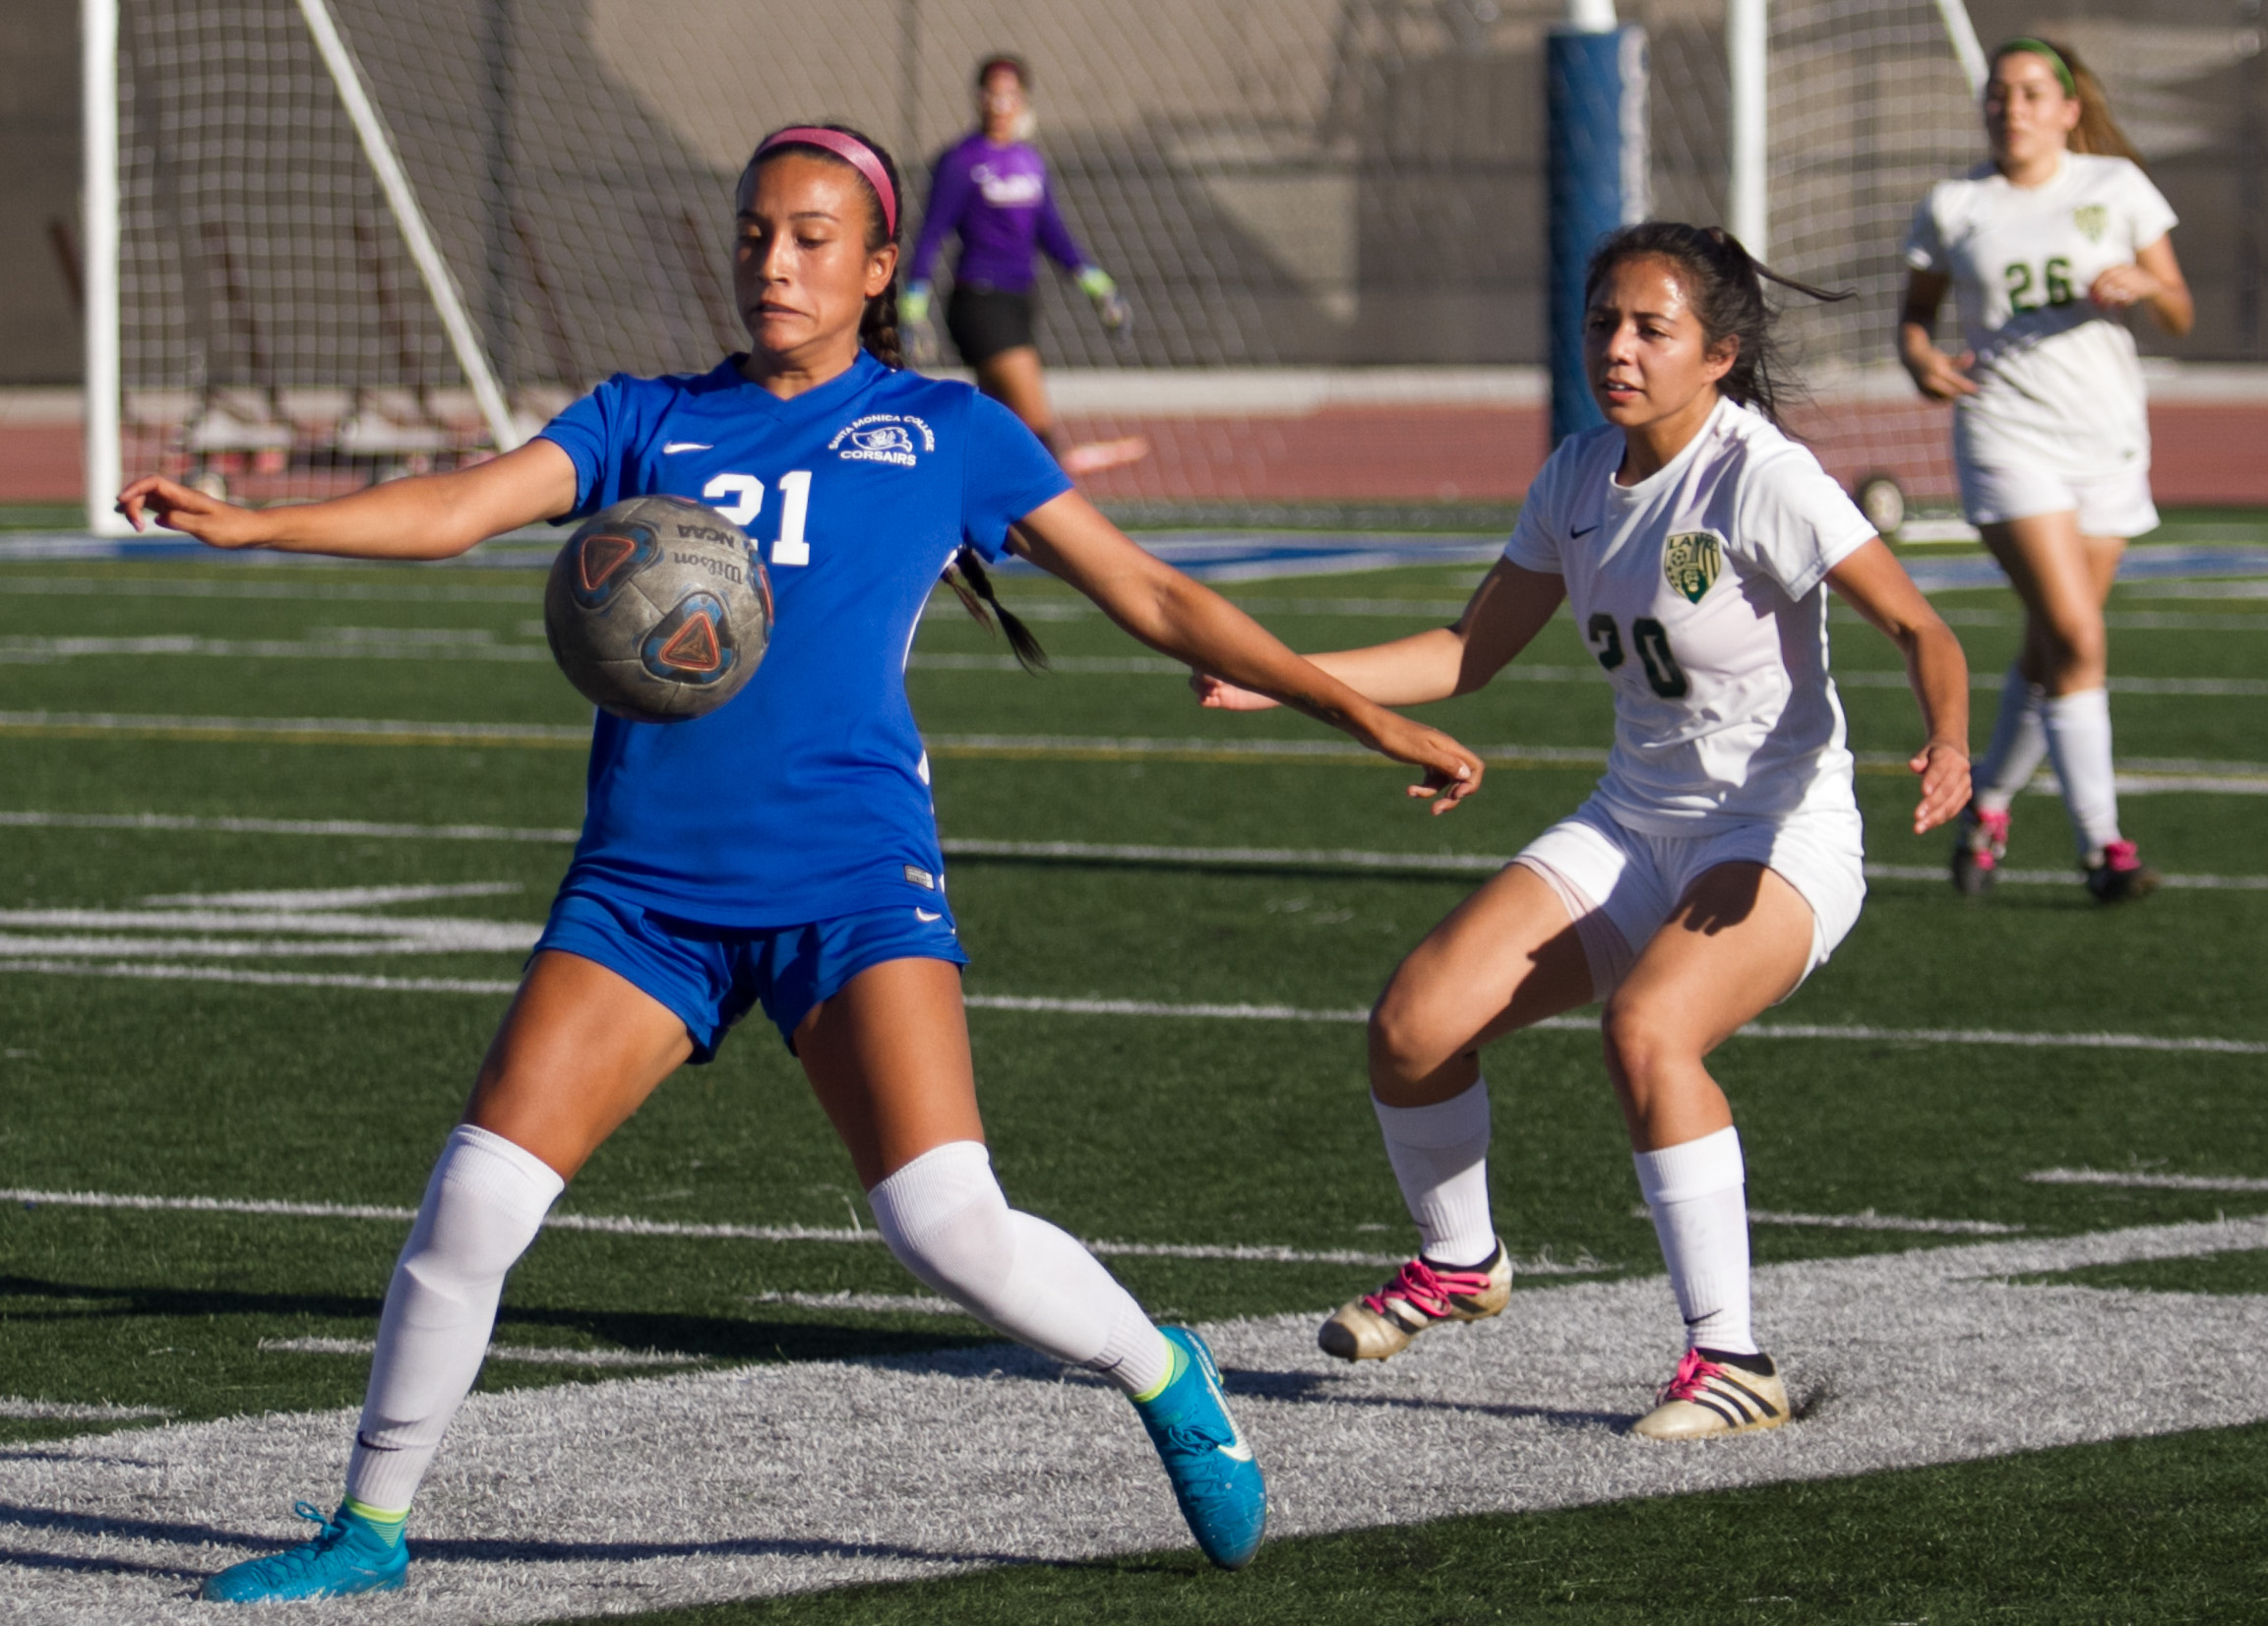  Santa Monica College Corsair Meredith Gomez (21)(L) attempts to control the ball against LA Valley College Monarch Alma Medina (20)(R) on Tuesday, October 24, 2017, on the Corsair Field at Santa Monica College in Santa Monica, California. The Corsai